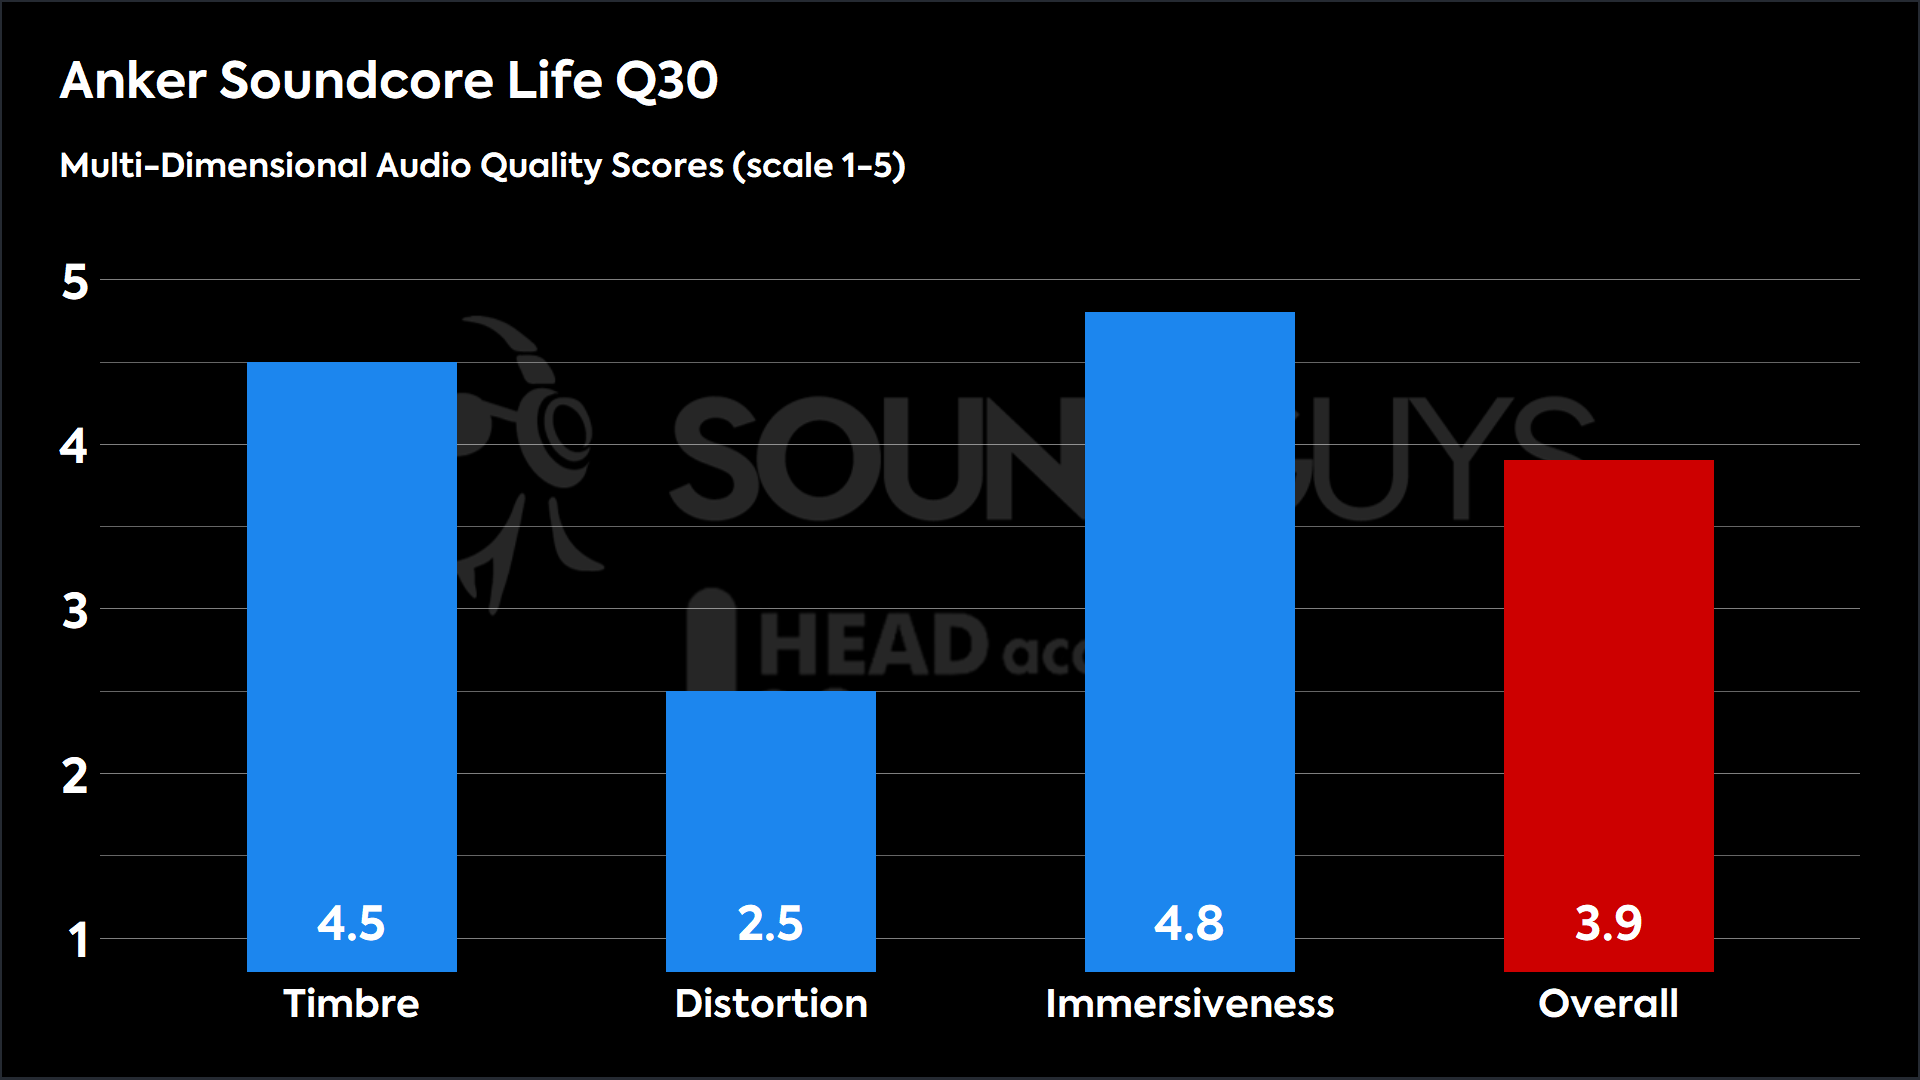 A chart showing the MDAQS assessment of the Anker Soundcore Life Q30.